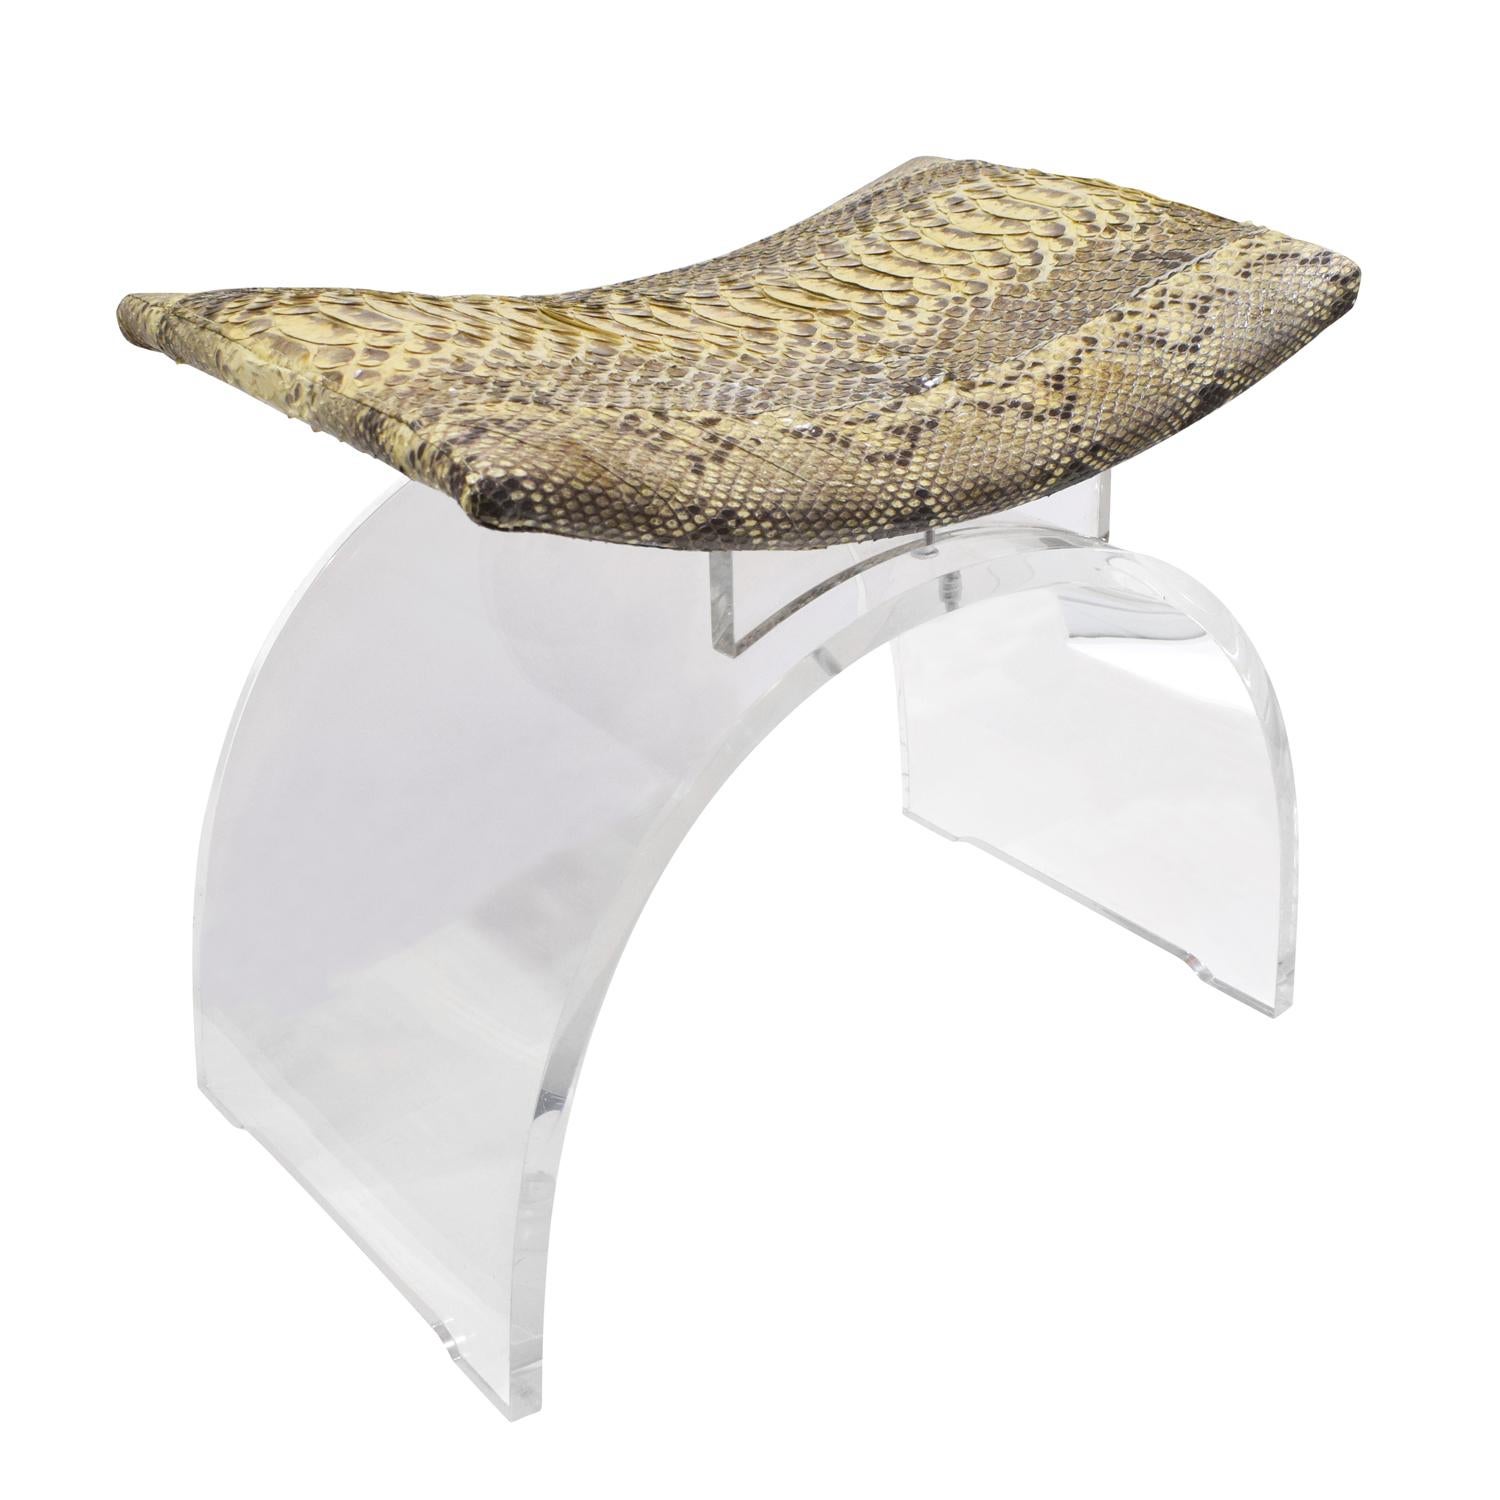 Sculptural bench in Lucite with python seat, American, 1970s. This bench is perfect for a vanity or accent piece.